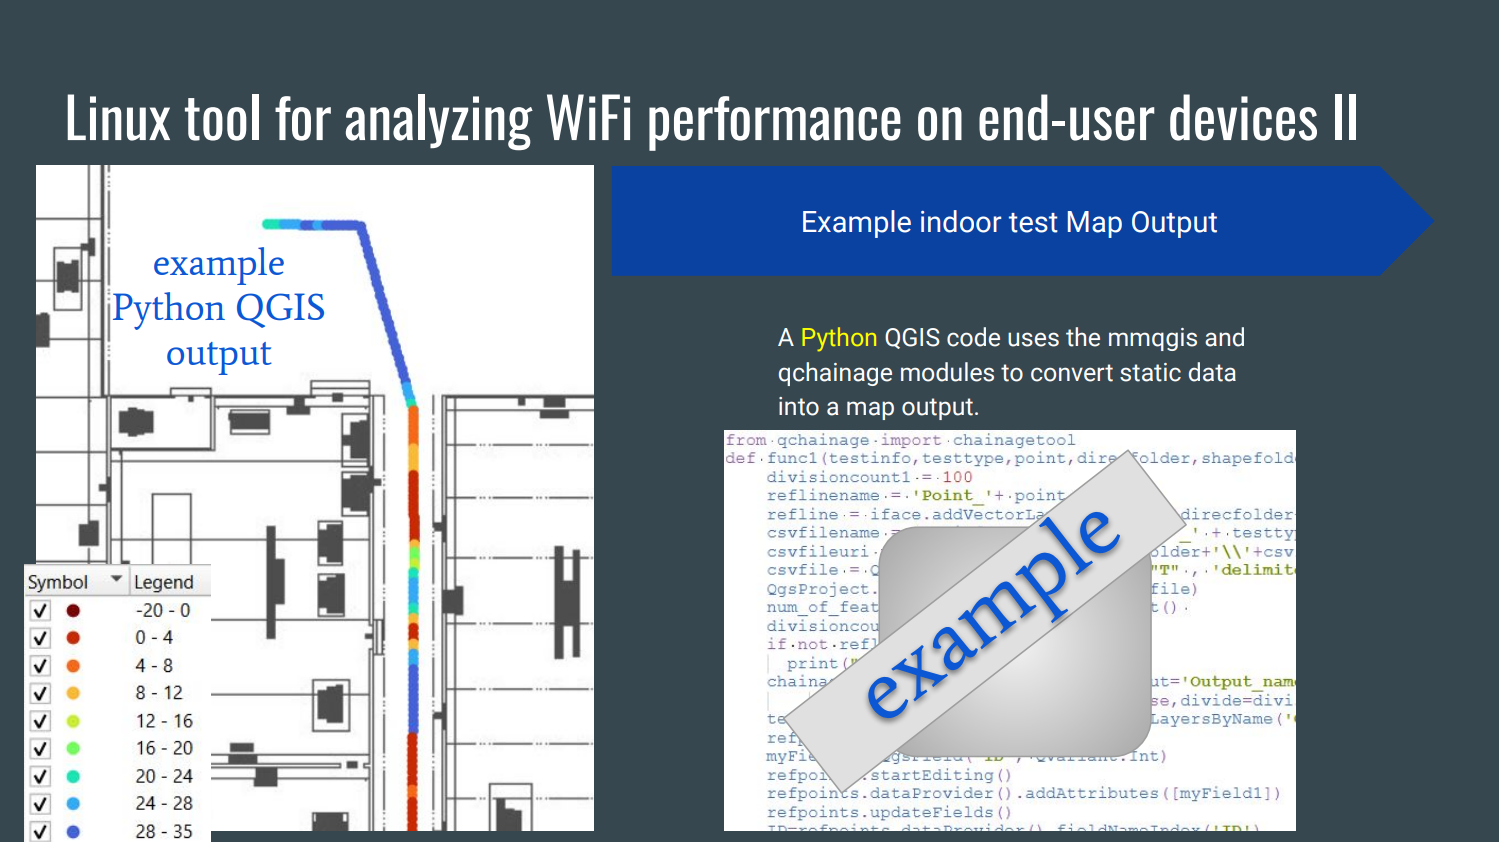 Linux tool for analyzing WiFi performance on end-user devices II